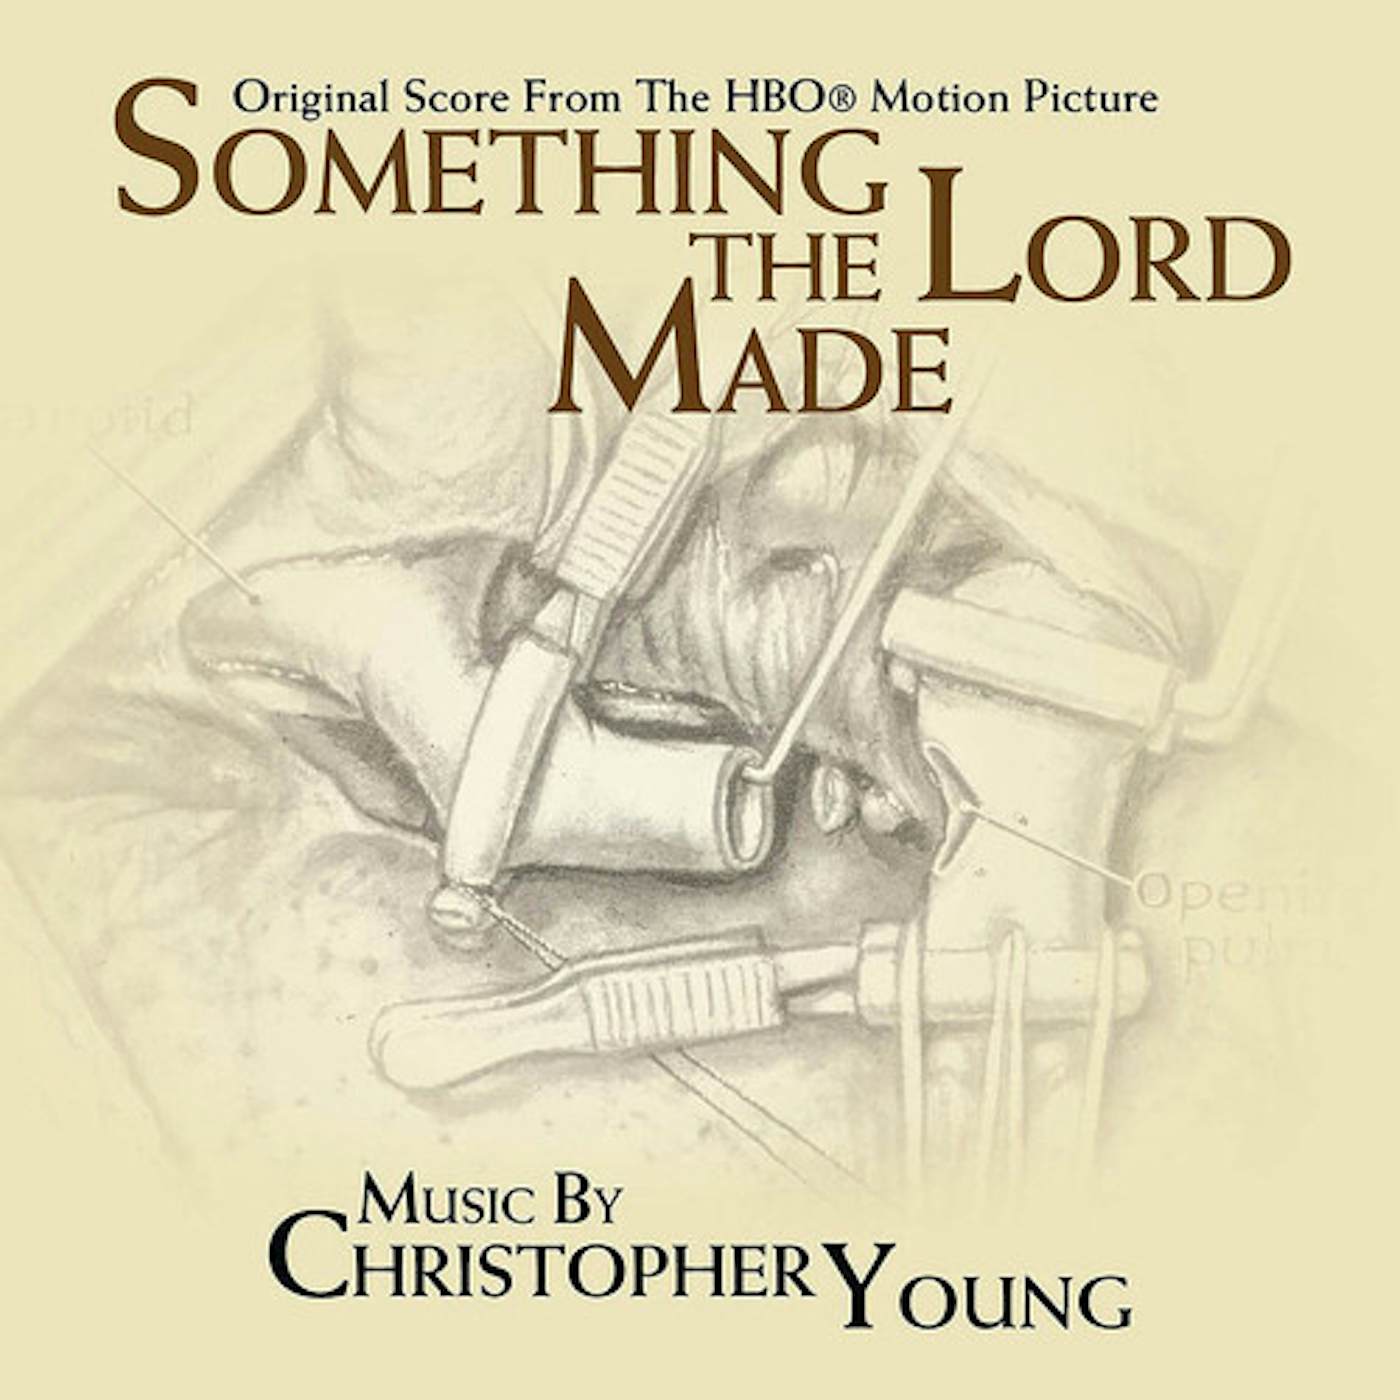 Christopher Young SOMETHING THE LORD MADE - Original Soundtrack CD